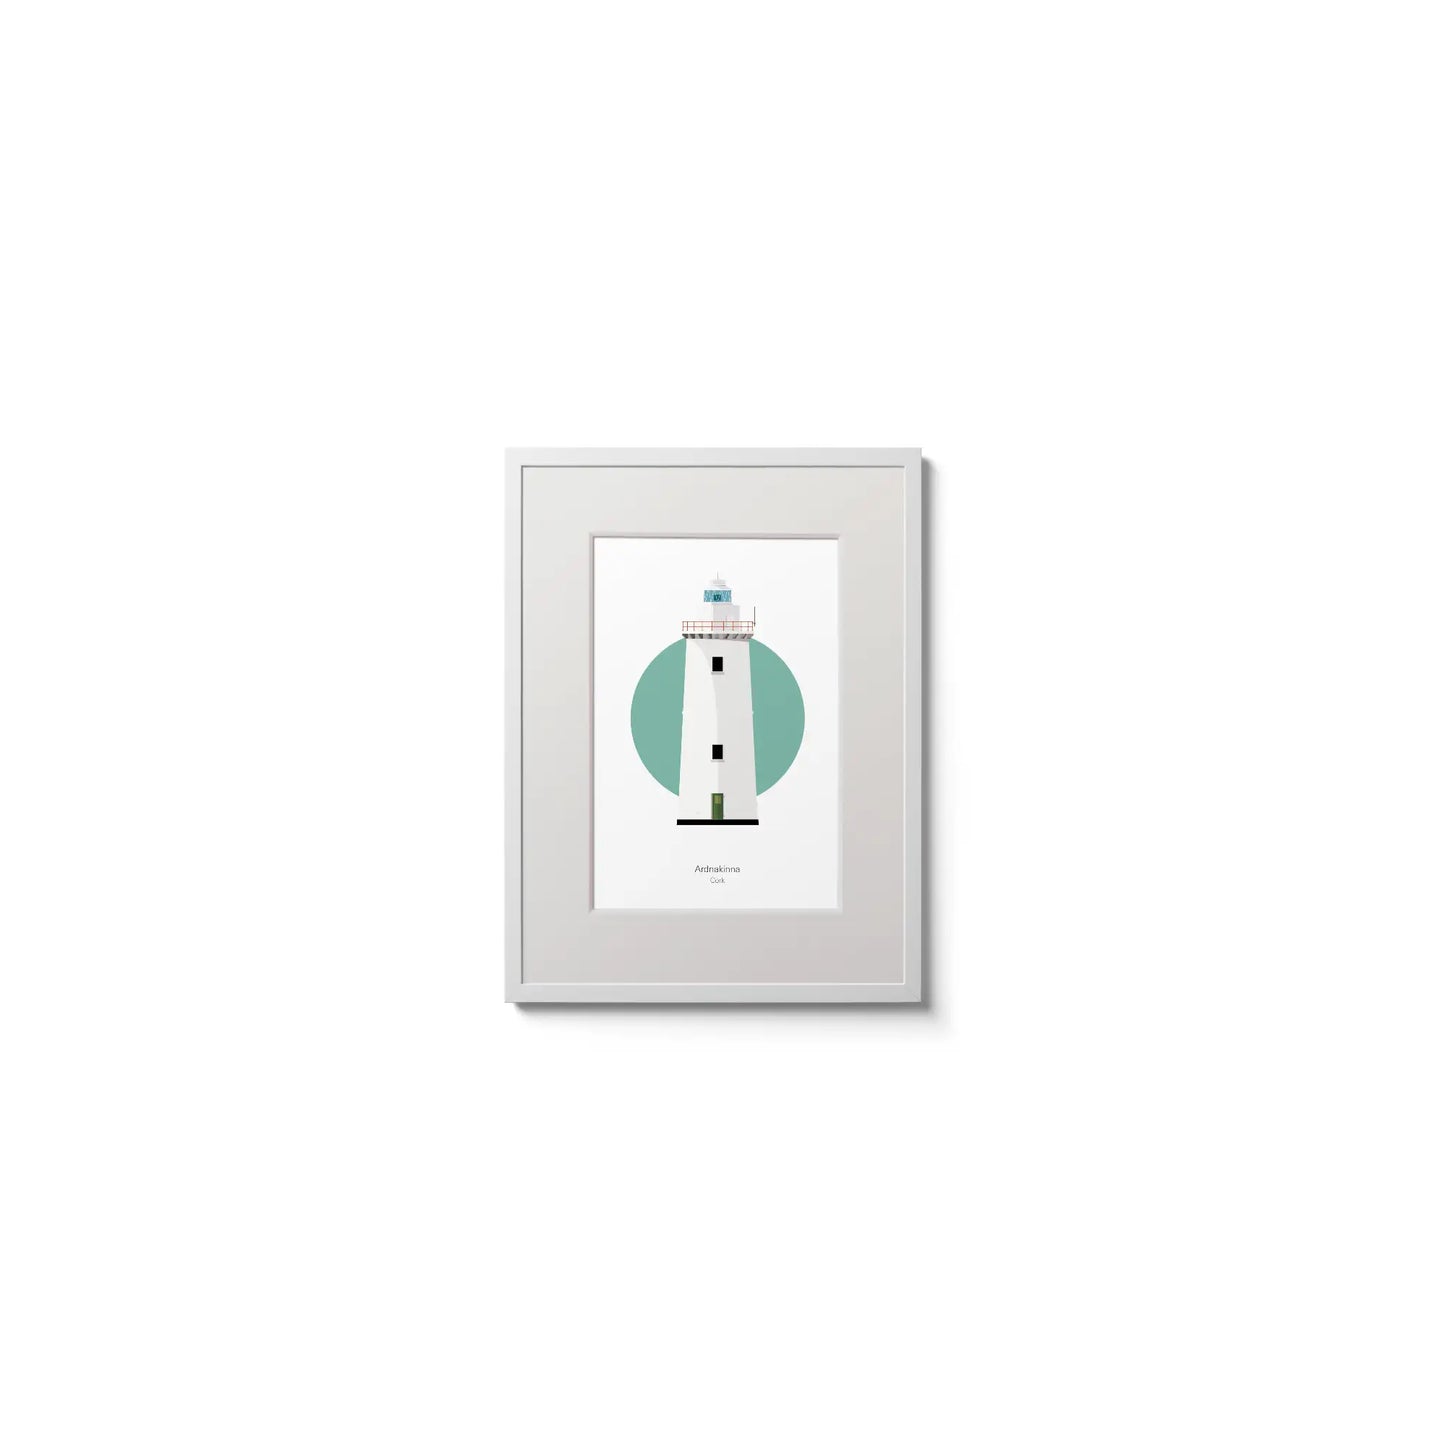 Illustration of Ardnakinna lighthouse on a white background inside light blue square,  in a white frame measuring 15x20cm.